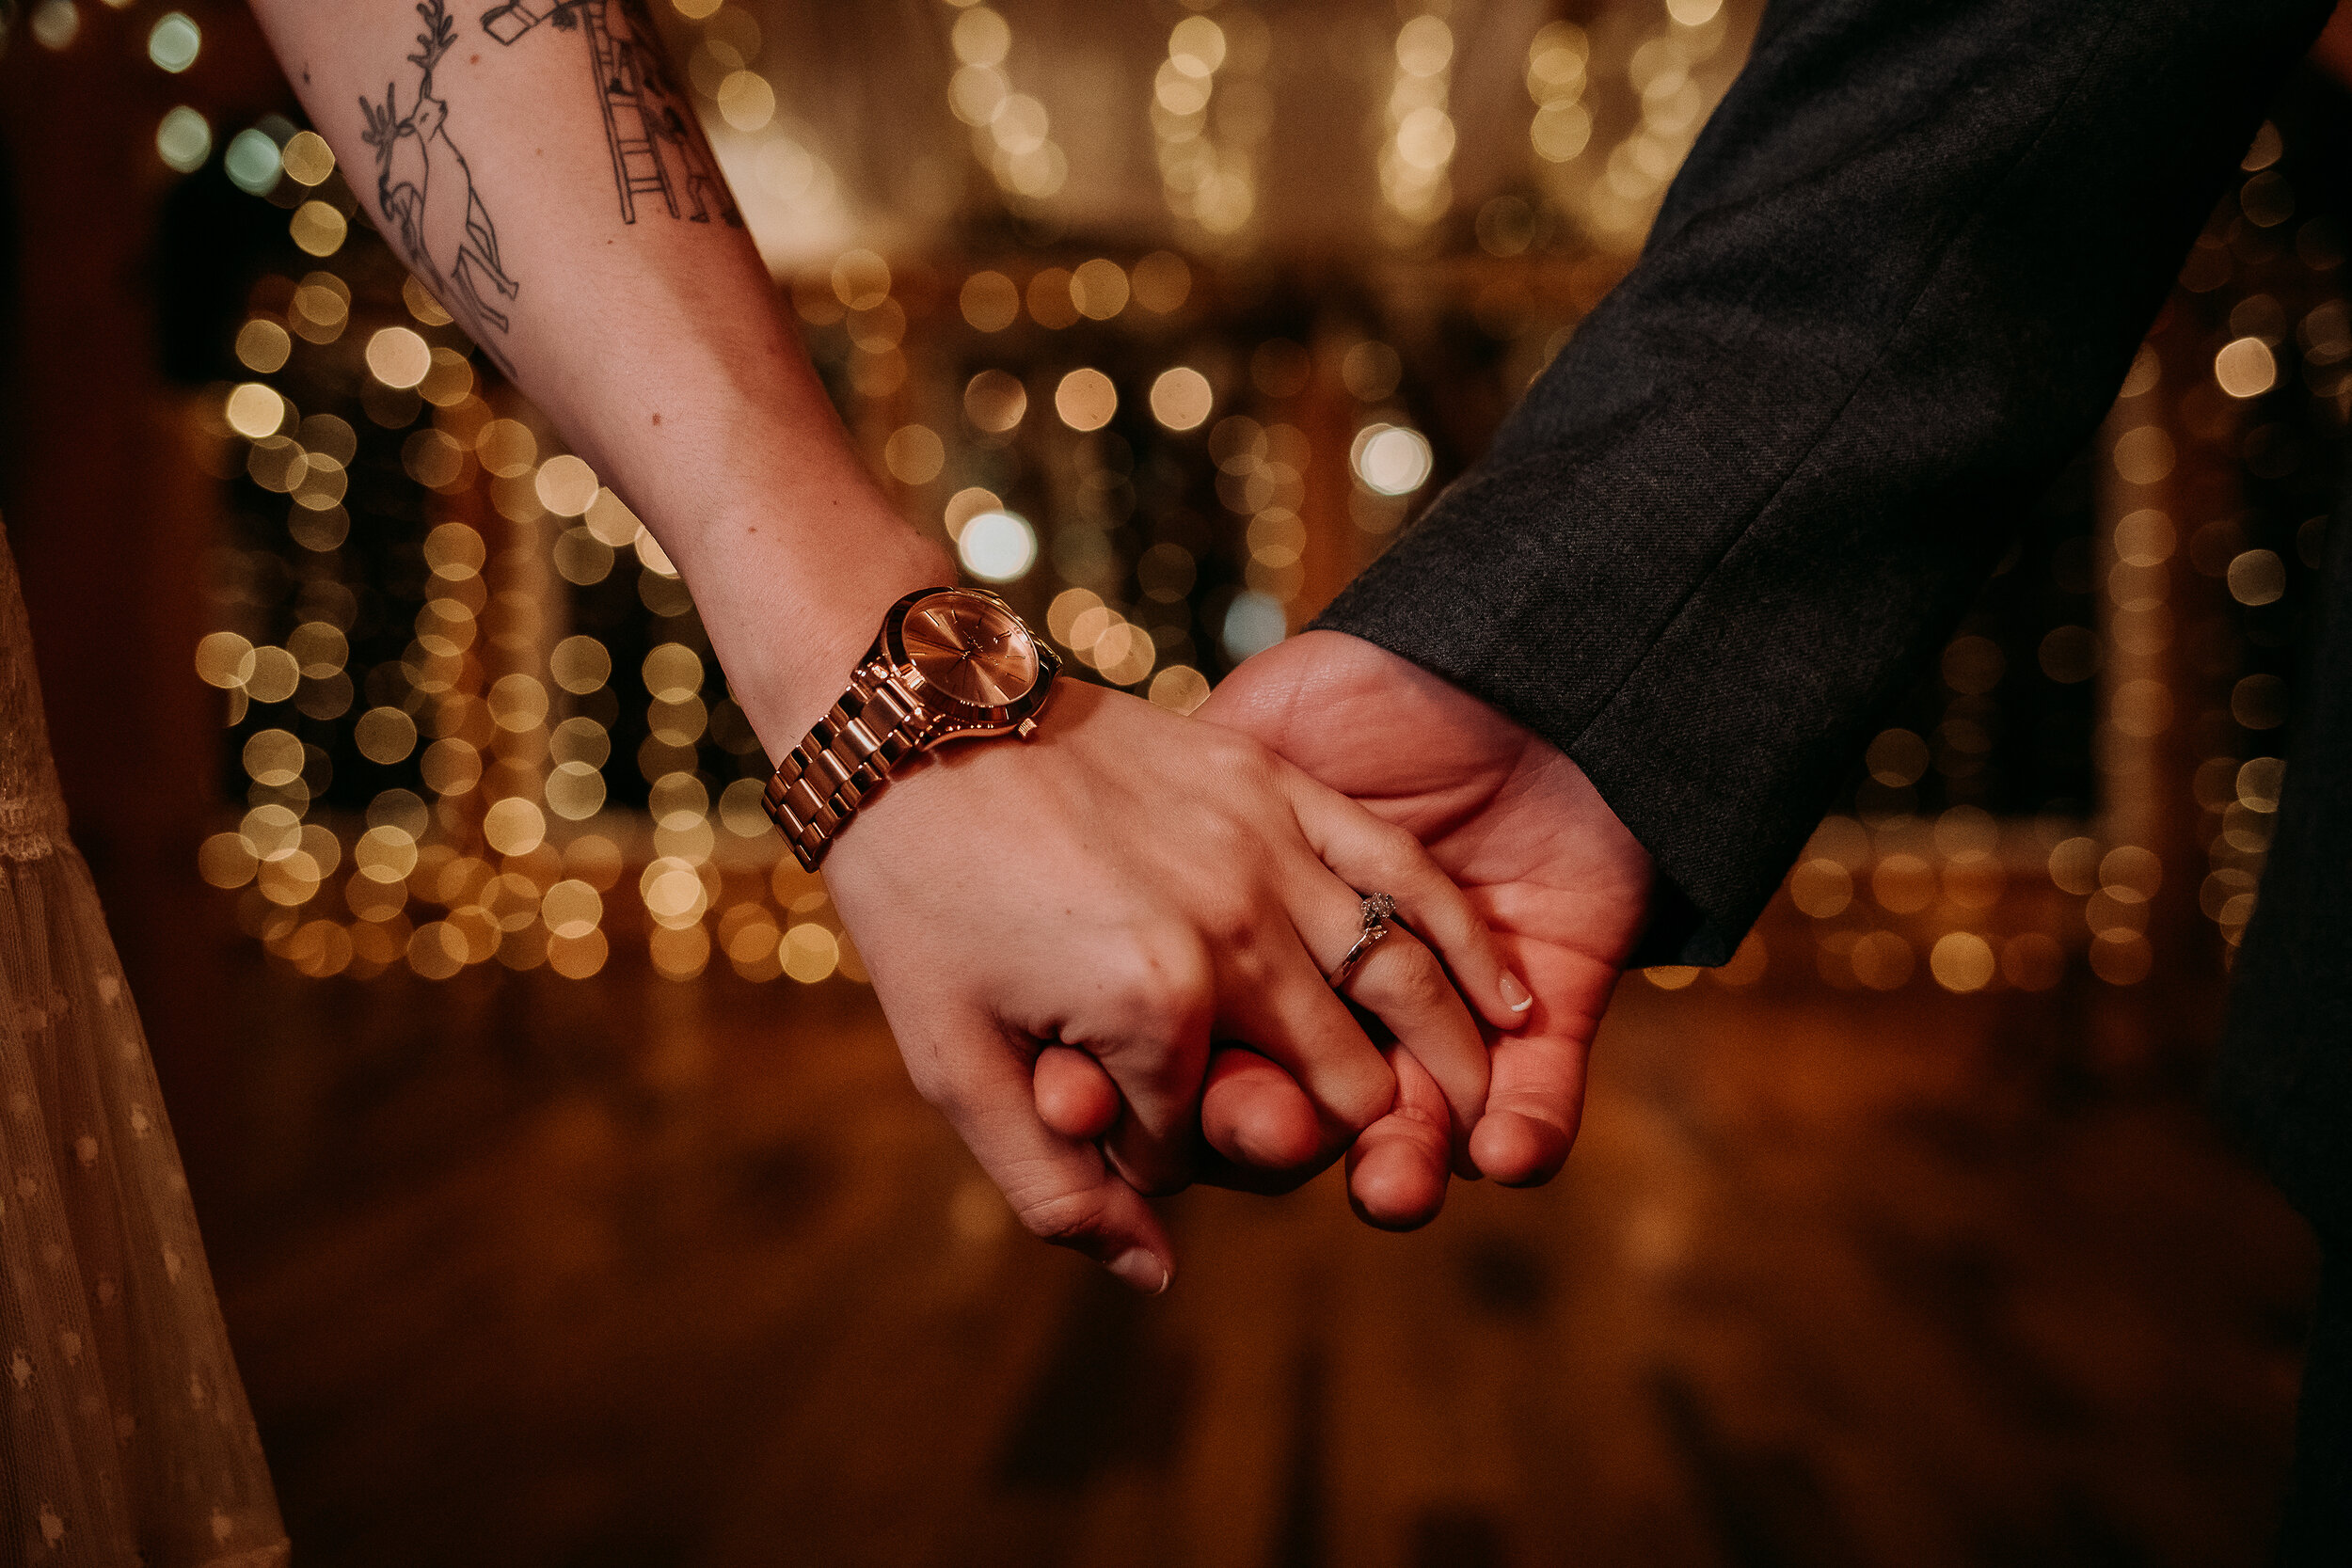  Kindred + Co. Photography captures wedding ring details at this intimate treehouse elopement in Akron, Ohio. rose gold wedding ring, rose gold wedding watch, deer tattoos, string lights, treehouse wedding, elopement, professional elopement photograp